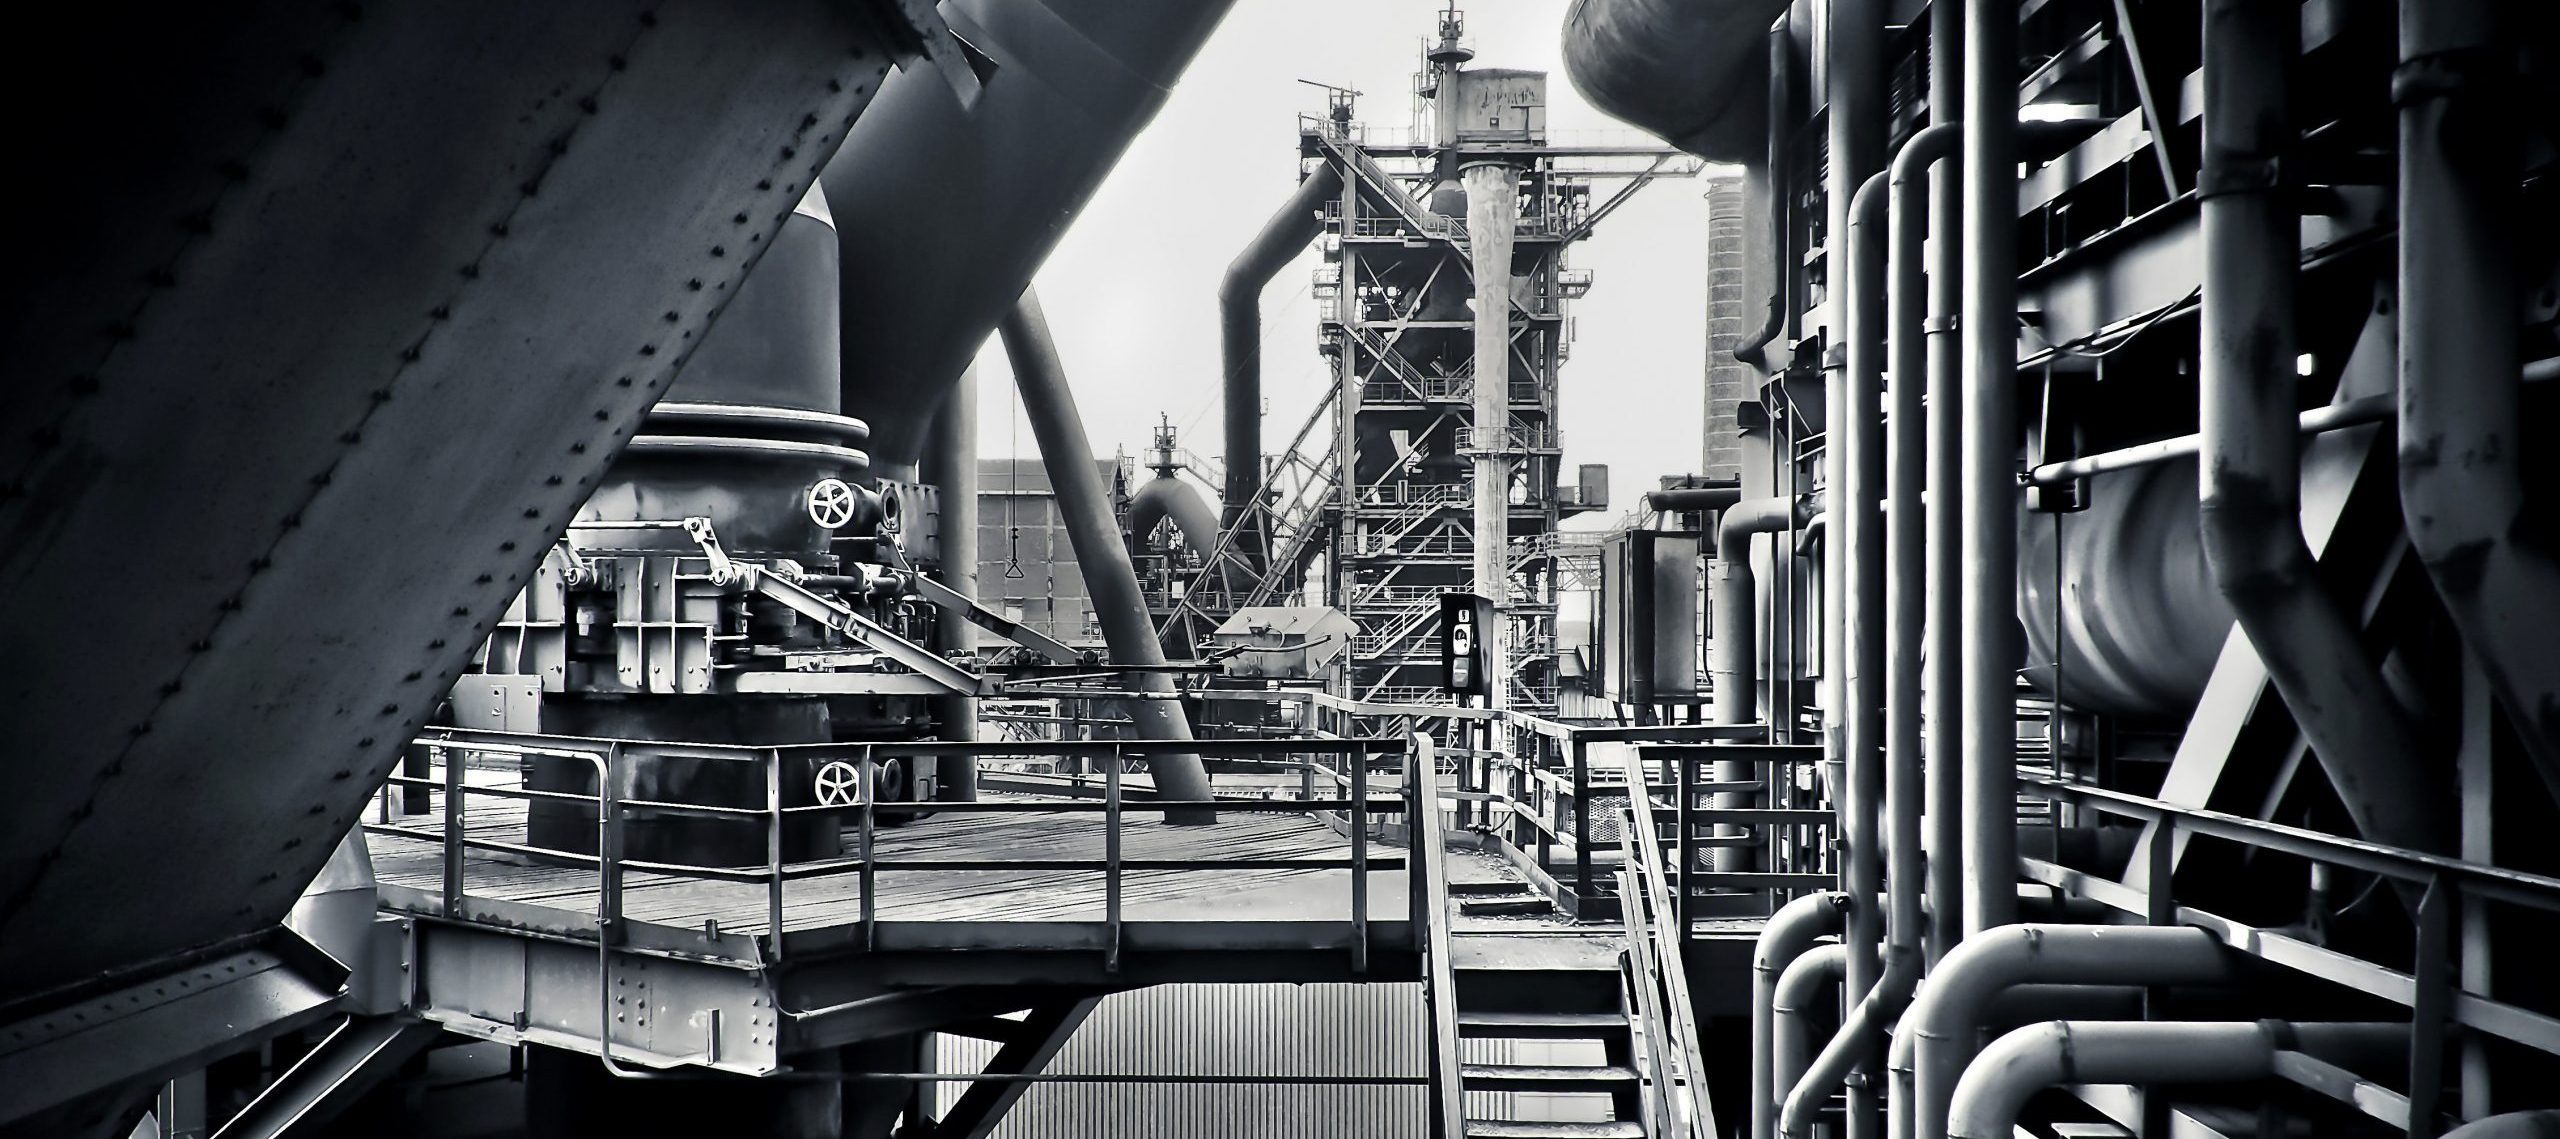 black-and-white-factory-industrial-plant-415945